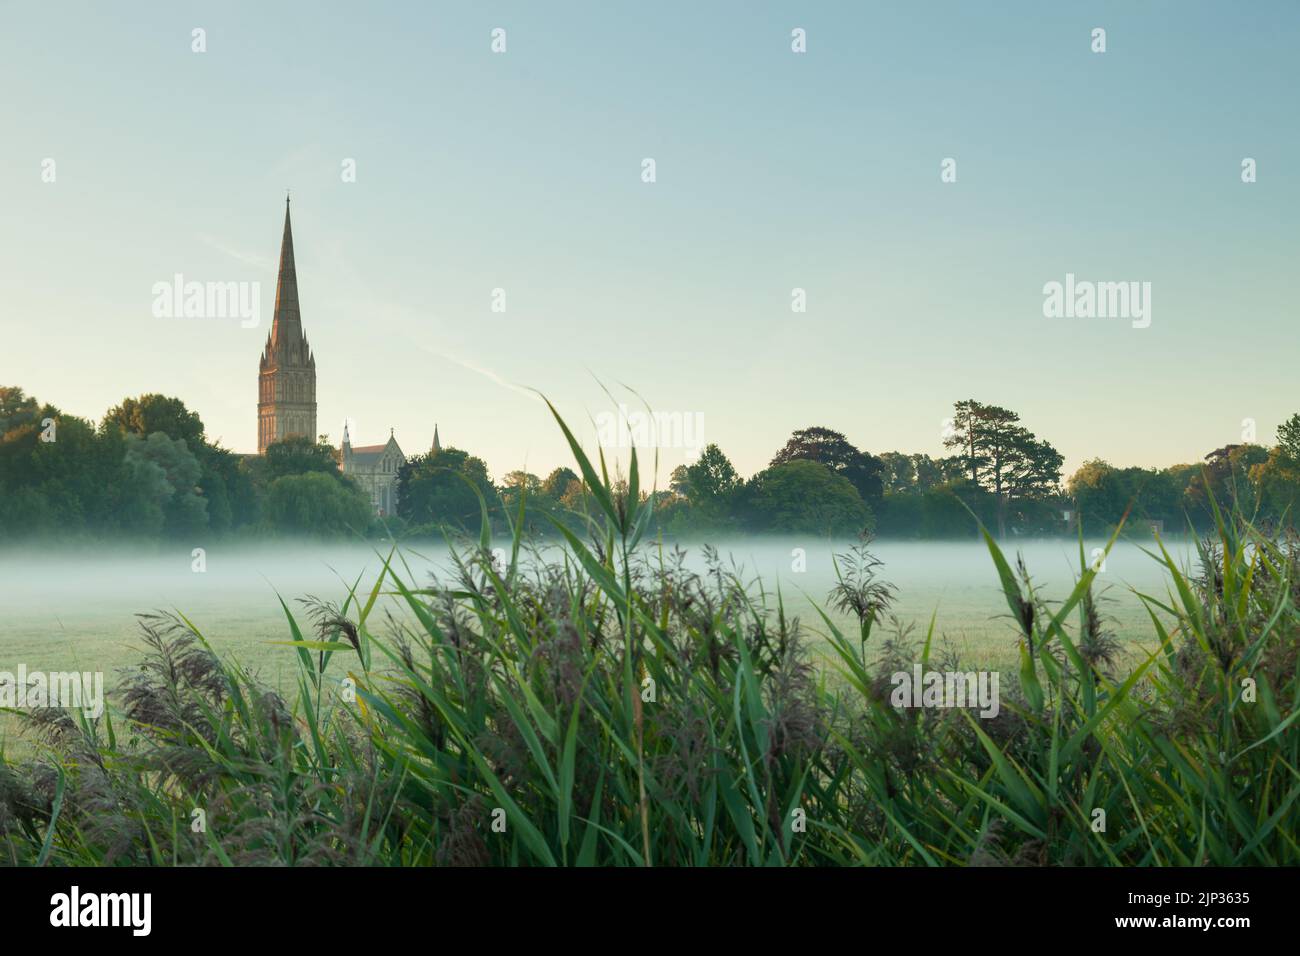 Sommersonnenaufgang in der Salisbury Cathedral, Wiltshire, England. Stockfoto